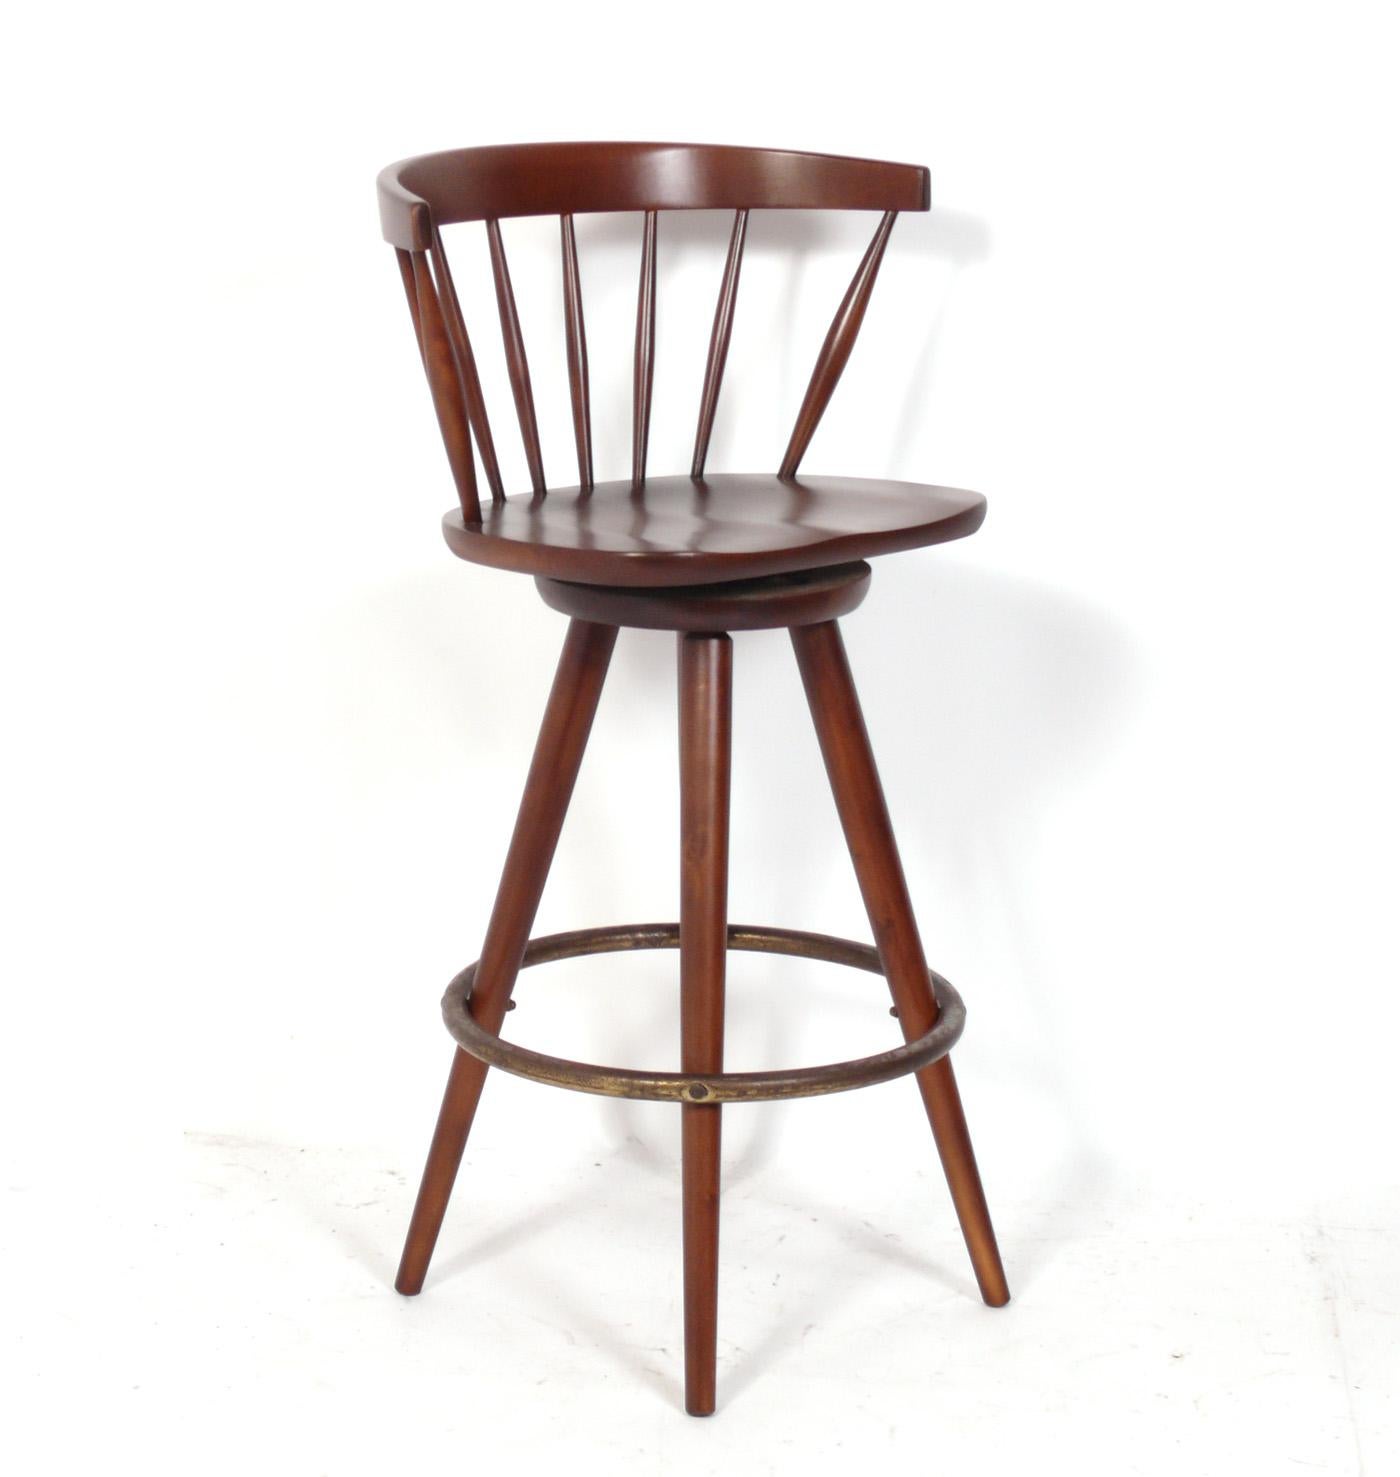 Set of Four Clean Lined Bar Stools, in the manner of George Nakashima, American, circa 1950s. These look very similar to the spindle back chairs that Nakashima designed for Knoll. They have been recently refinished in a medium brown walnut color and